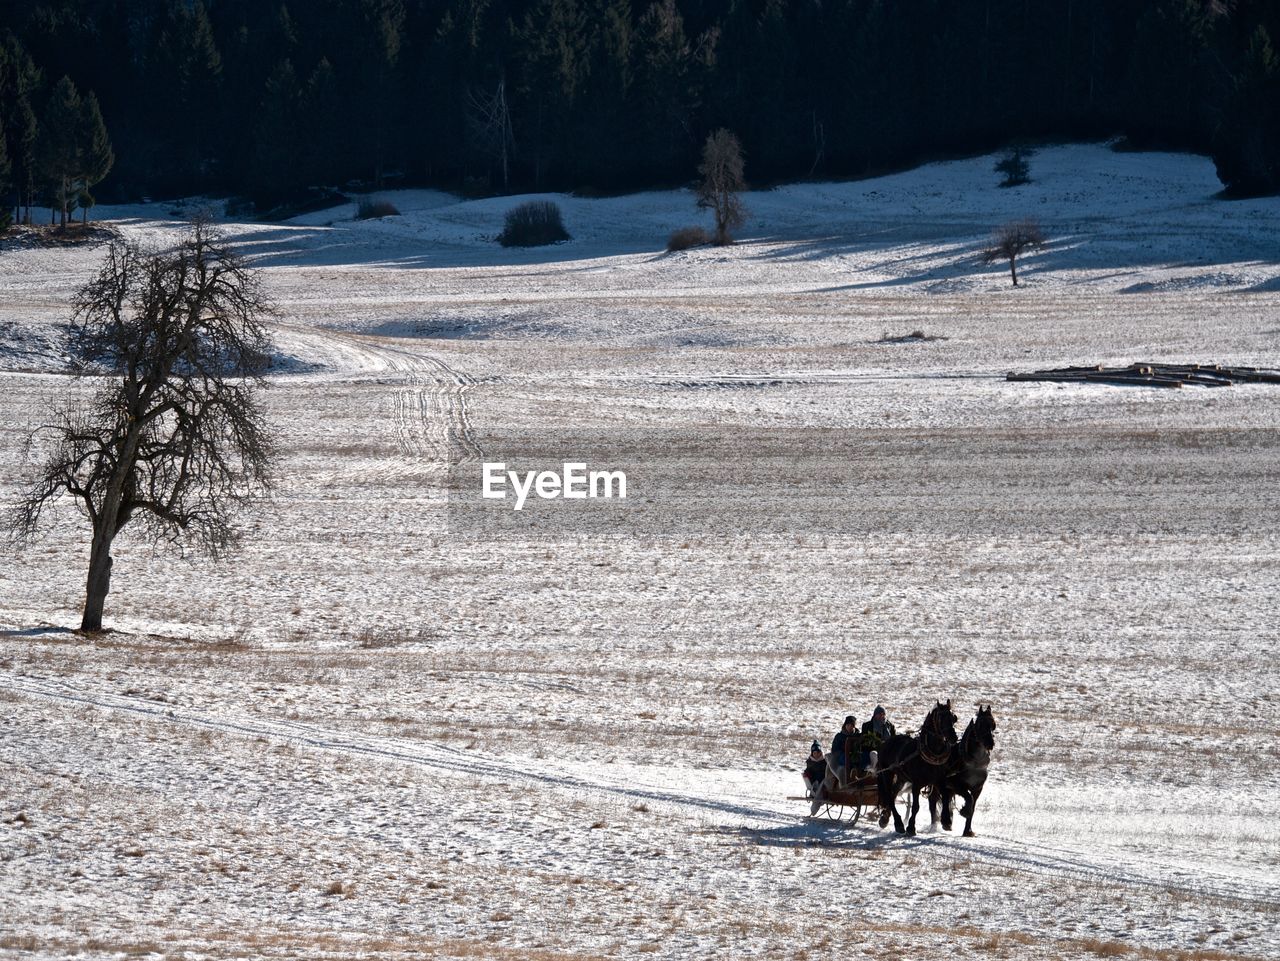 HORSES ON SNOW COVERED LAND